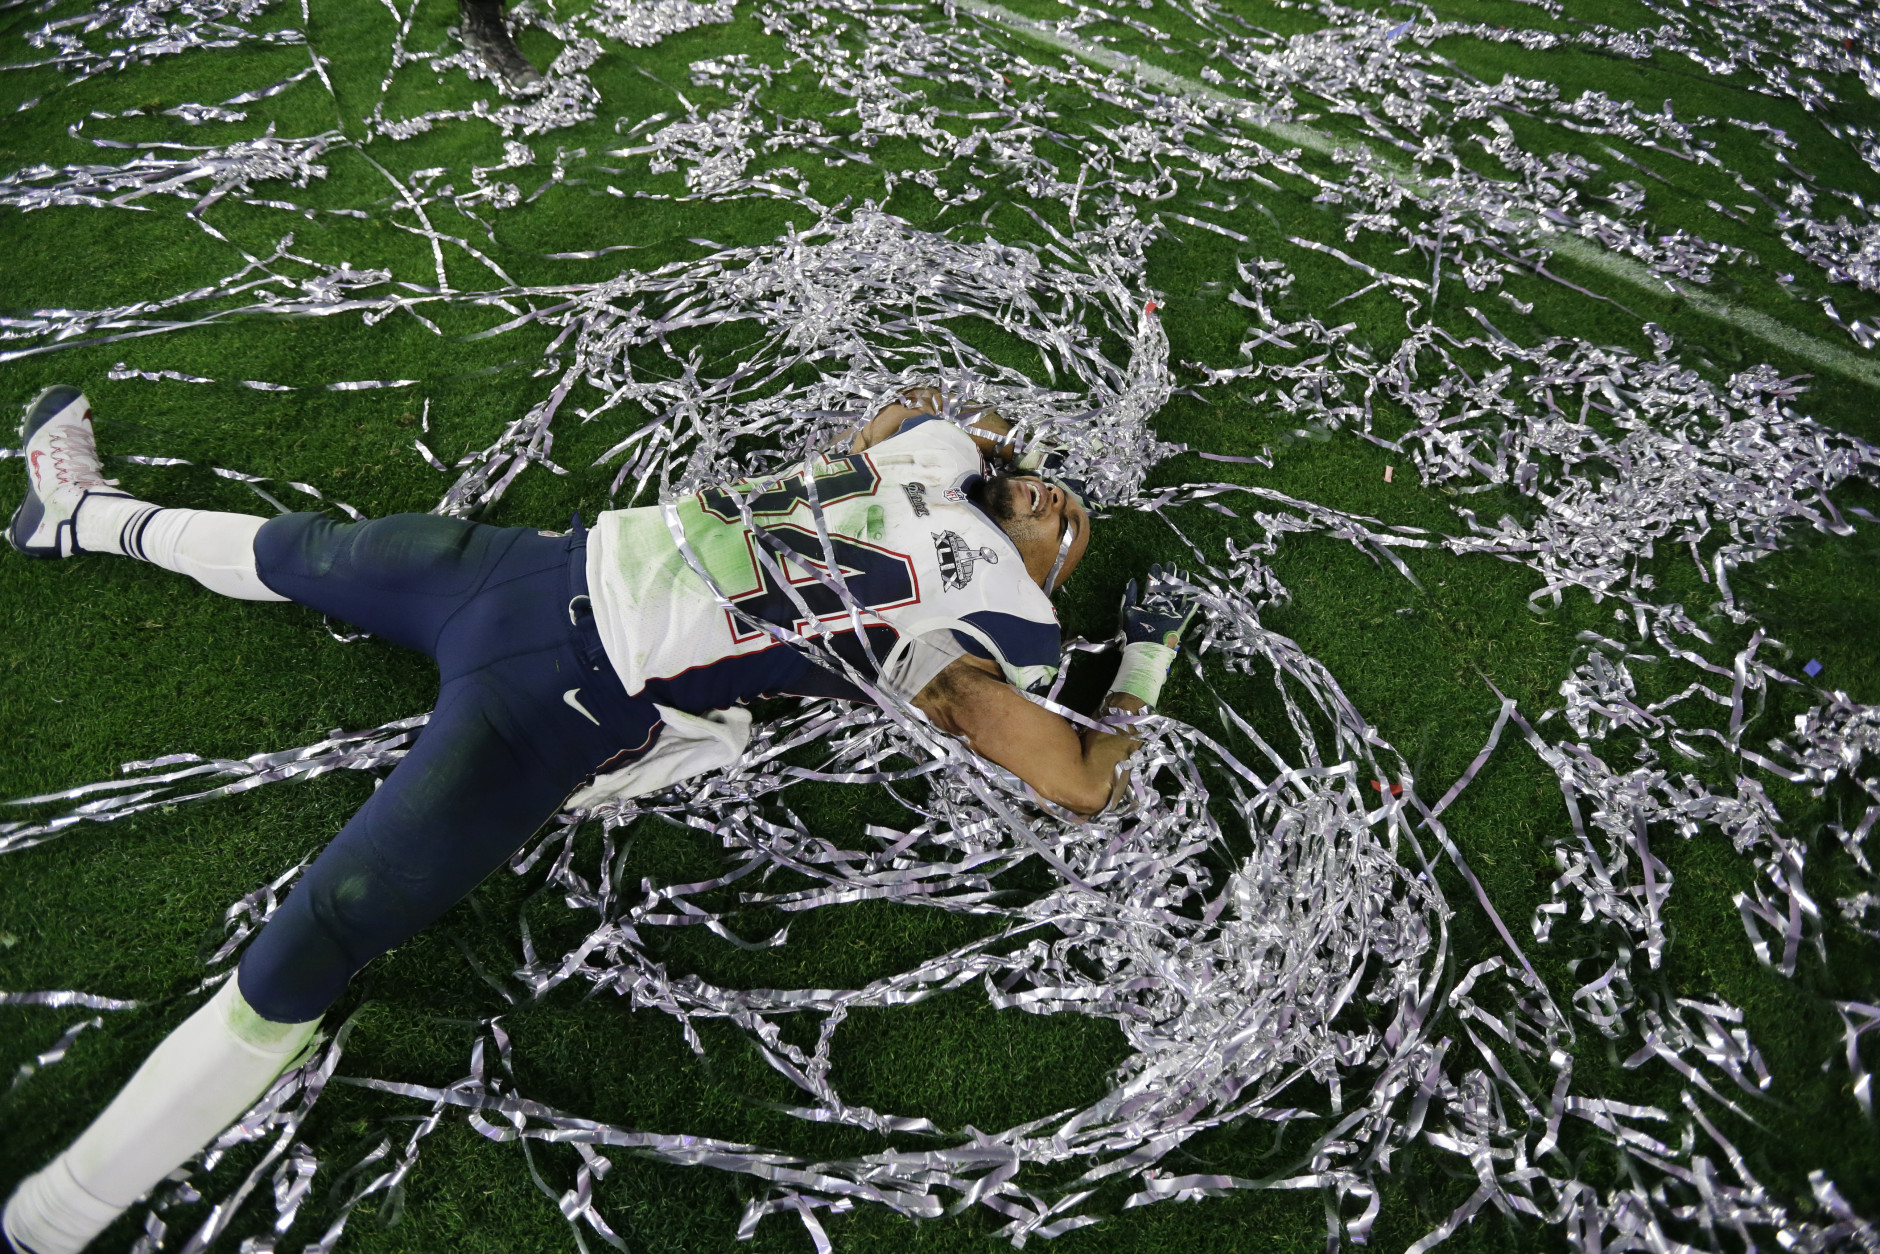 New England Patriots running back Shane Vereen (34) celebrates after an NFL Super Bowl XLIX football game against the Seattle Seahawks Sunday, Feb. 1, 2015, in Glendale, Ariz. The Patriots won the game 28-24. (AP Photo/Ben Margot)